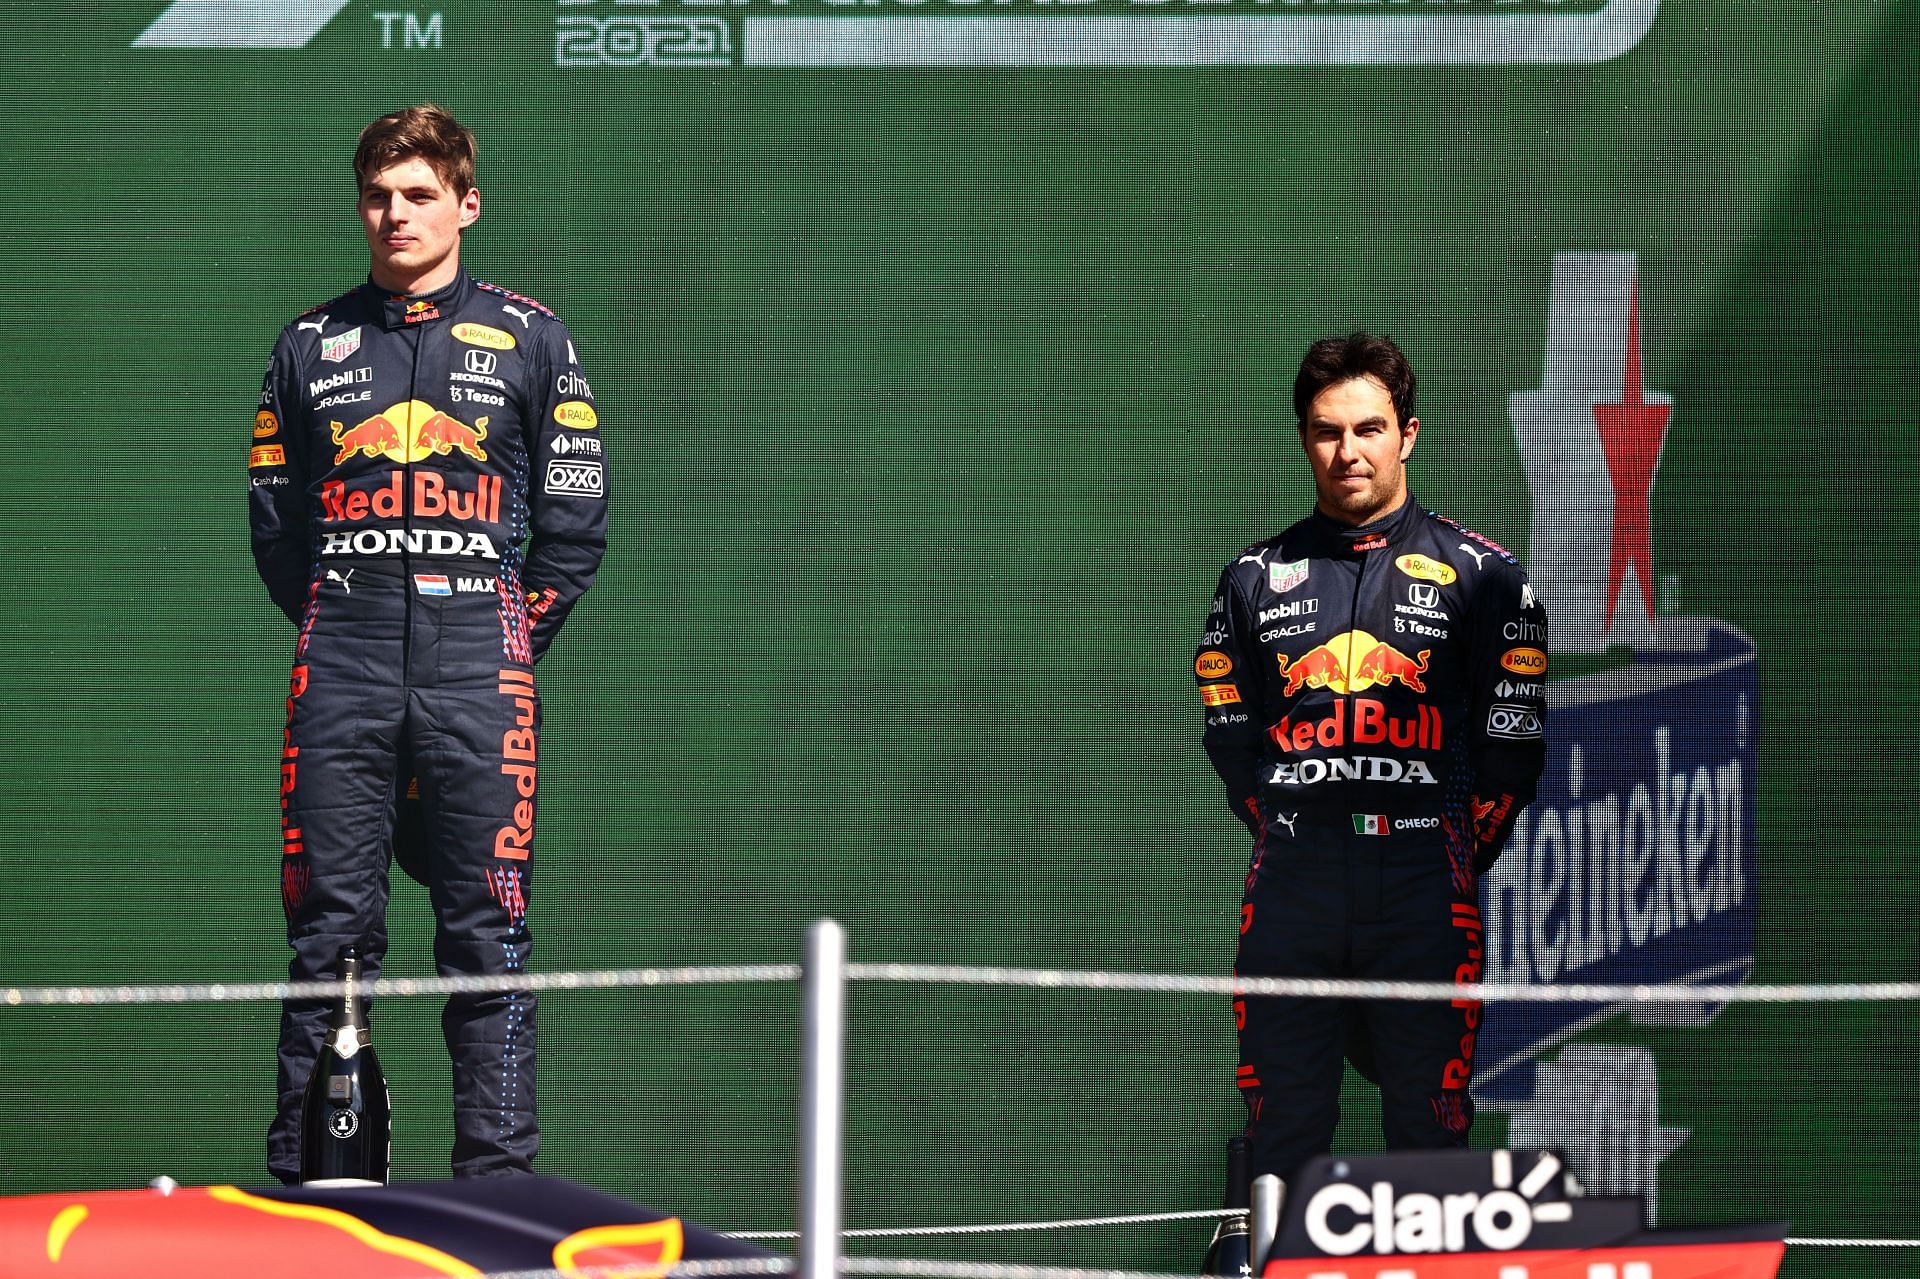 Max Verstappen (left) and Sergio Perez (right) on the podium at the 2021 Mexican Grand Prix (Photo by Mark Thompson/Getty Images)